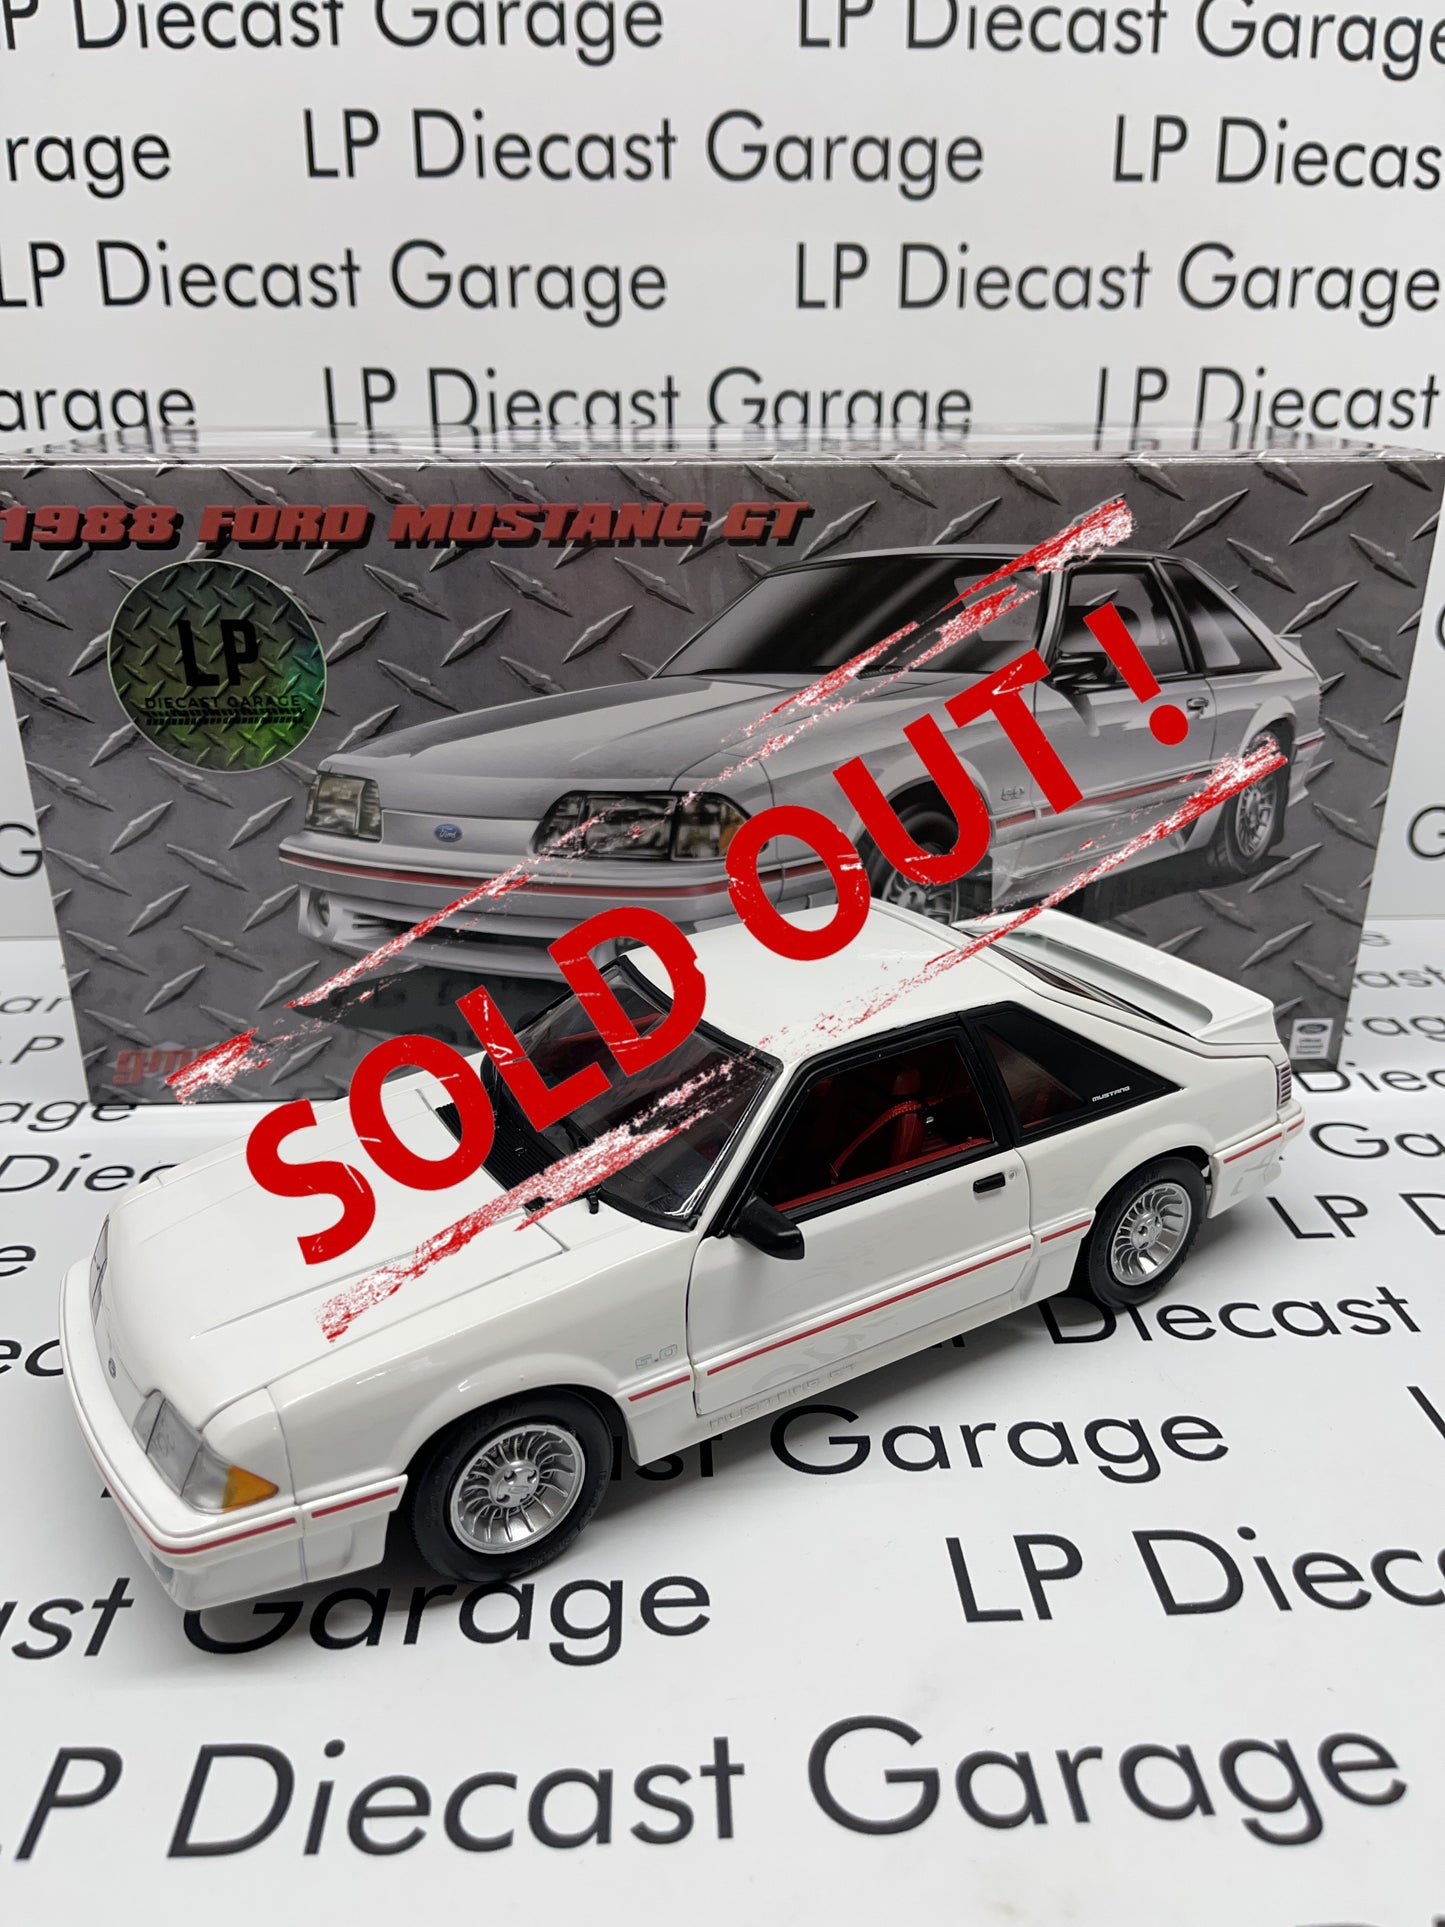 GMP 1988 Ford Mustang GT Oxford White w/ Red Body Stripe LP Diecast Garage Exclusive 1:18 Diecast